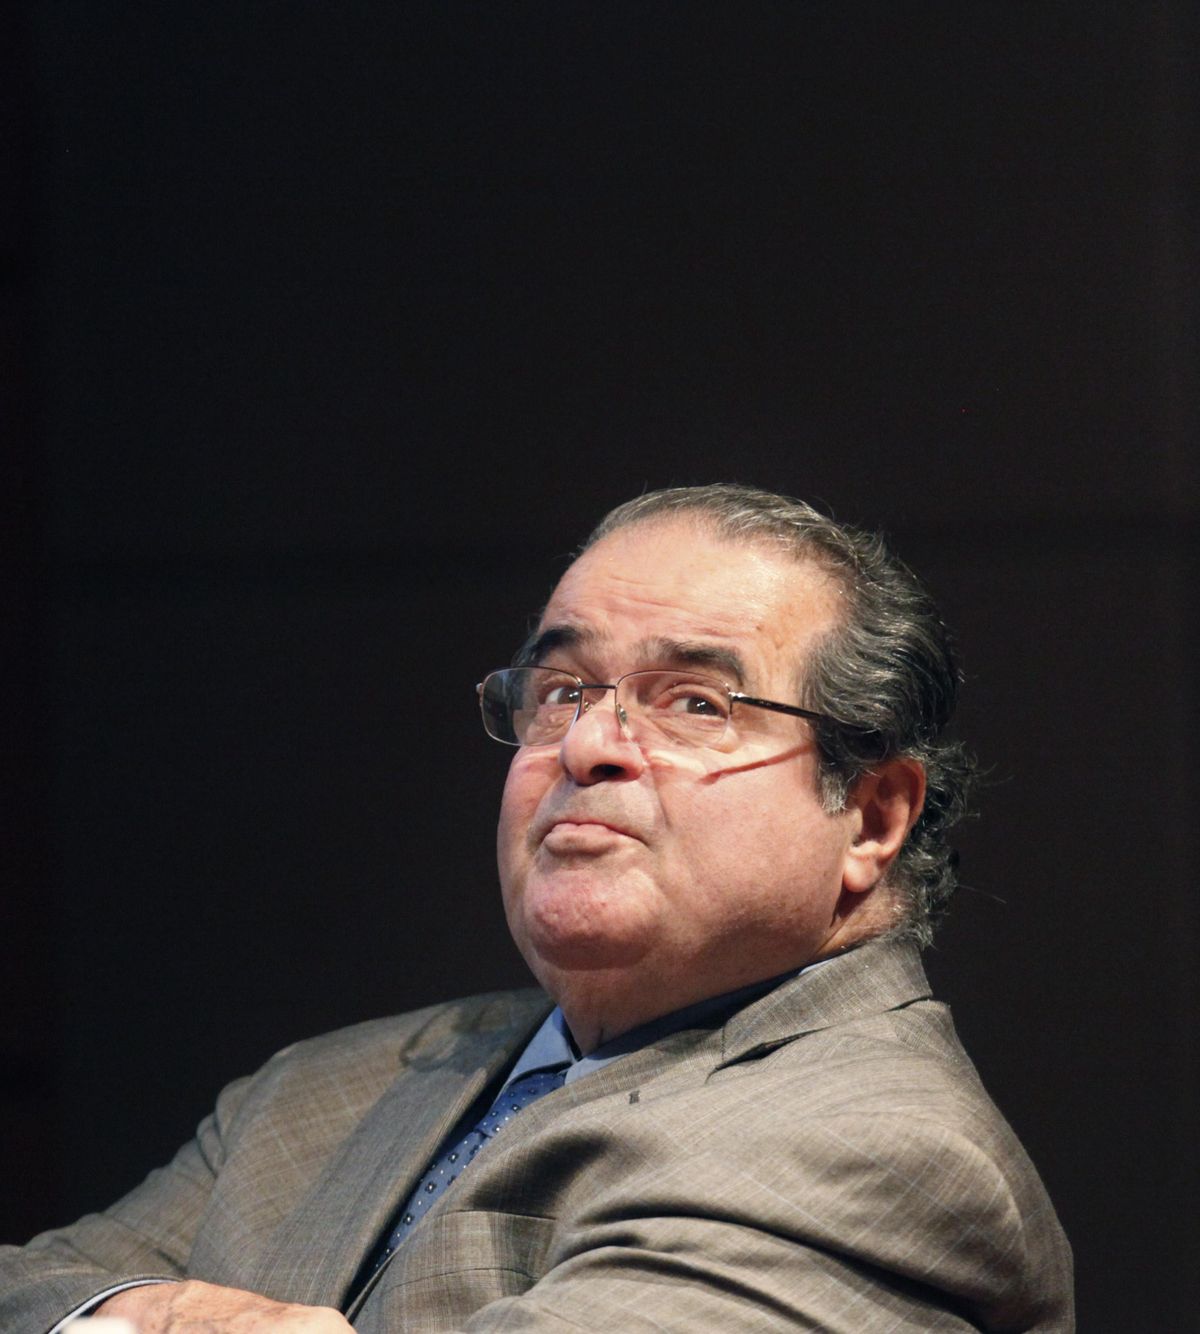 FILE - In this Oct. 18, 2011 file photo, U.S. Supreme Court justice Antonin Scalia looks into the balcony before addressing the Chicago-Kent College Law justice in Chicago. On Saturday, Feb. 13, 2016, the U.S. Marshals Service confirmed that Scalia has died at the age of 79. (Charles Rex Arbogast / Associated Press)